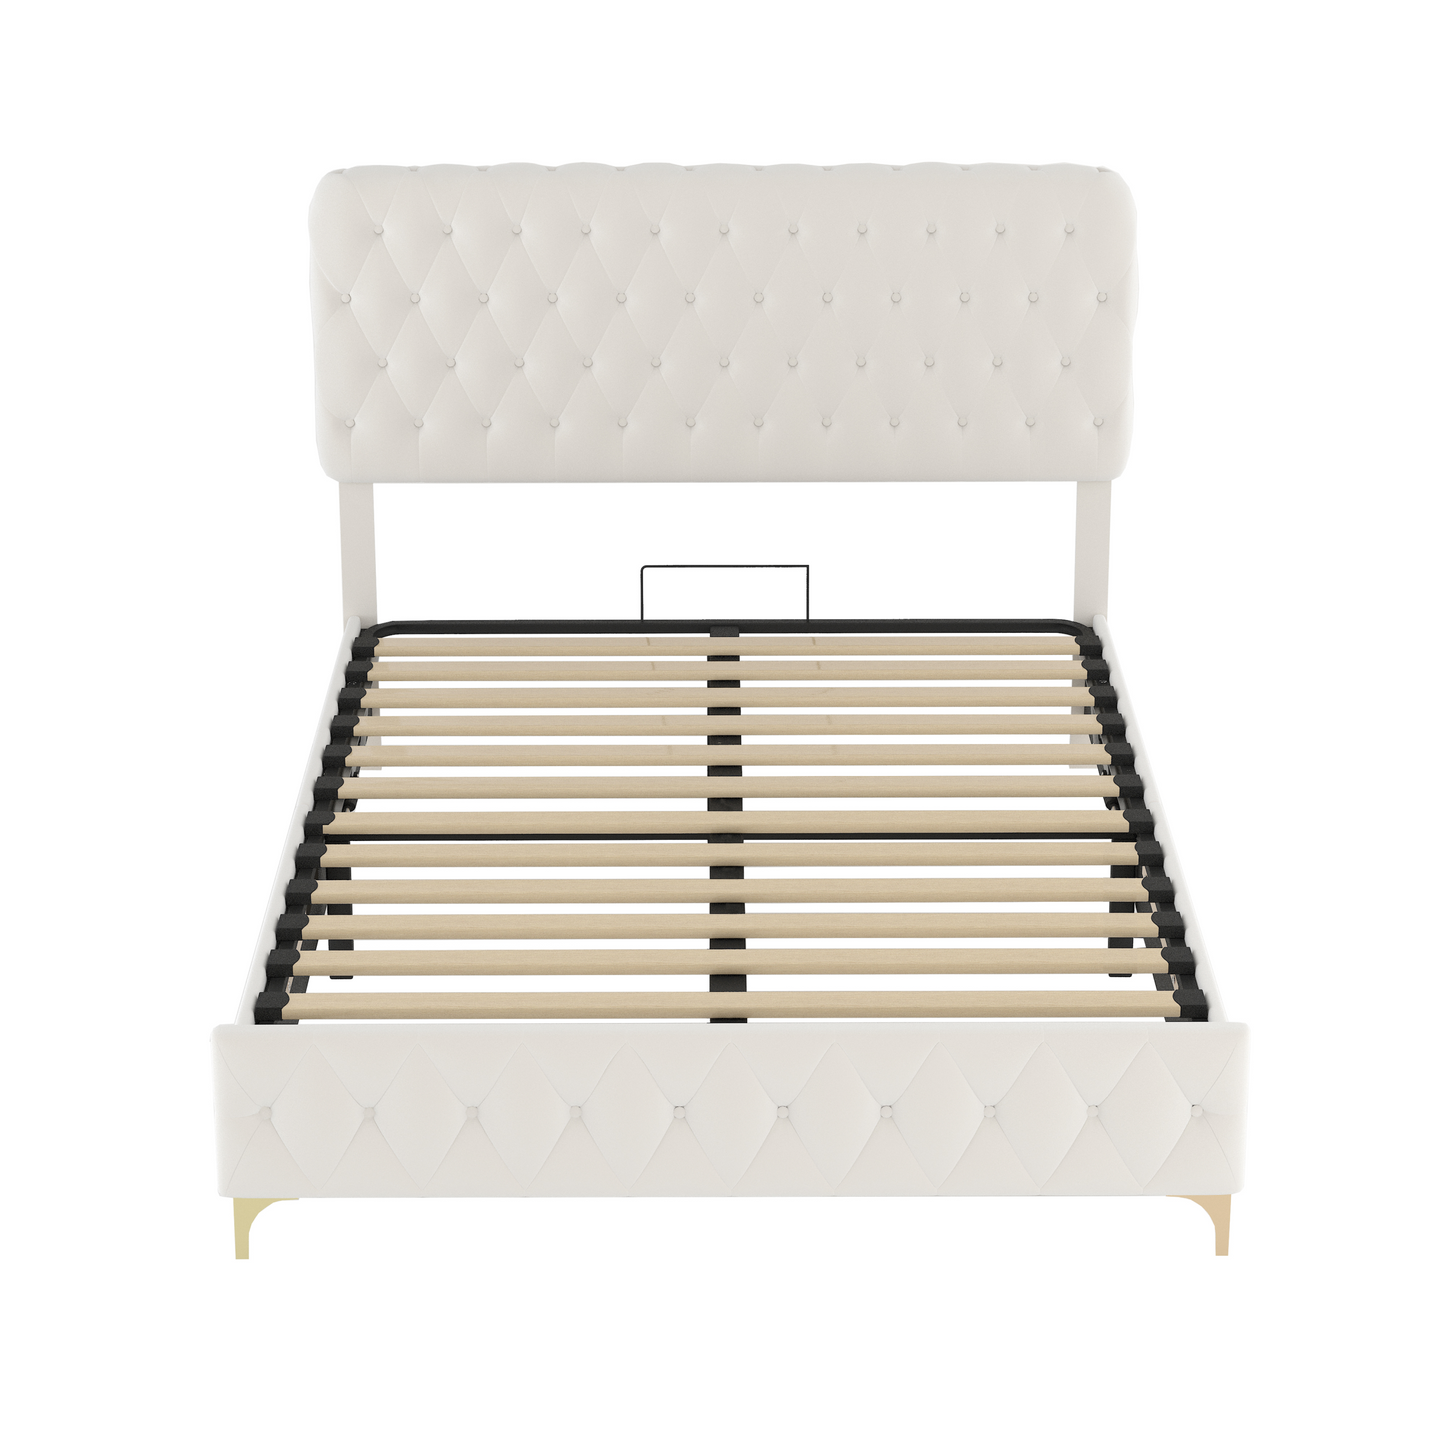 Queen Velvet Upholstered Platform Bed Frame With Pneumatic Hydraulic Function,  with Deep Tufted Buttons, Lift Up Storage Bed With Hidden Underbed Oversized Storage, Beige